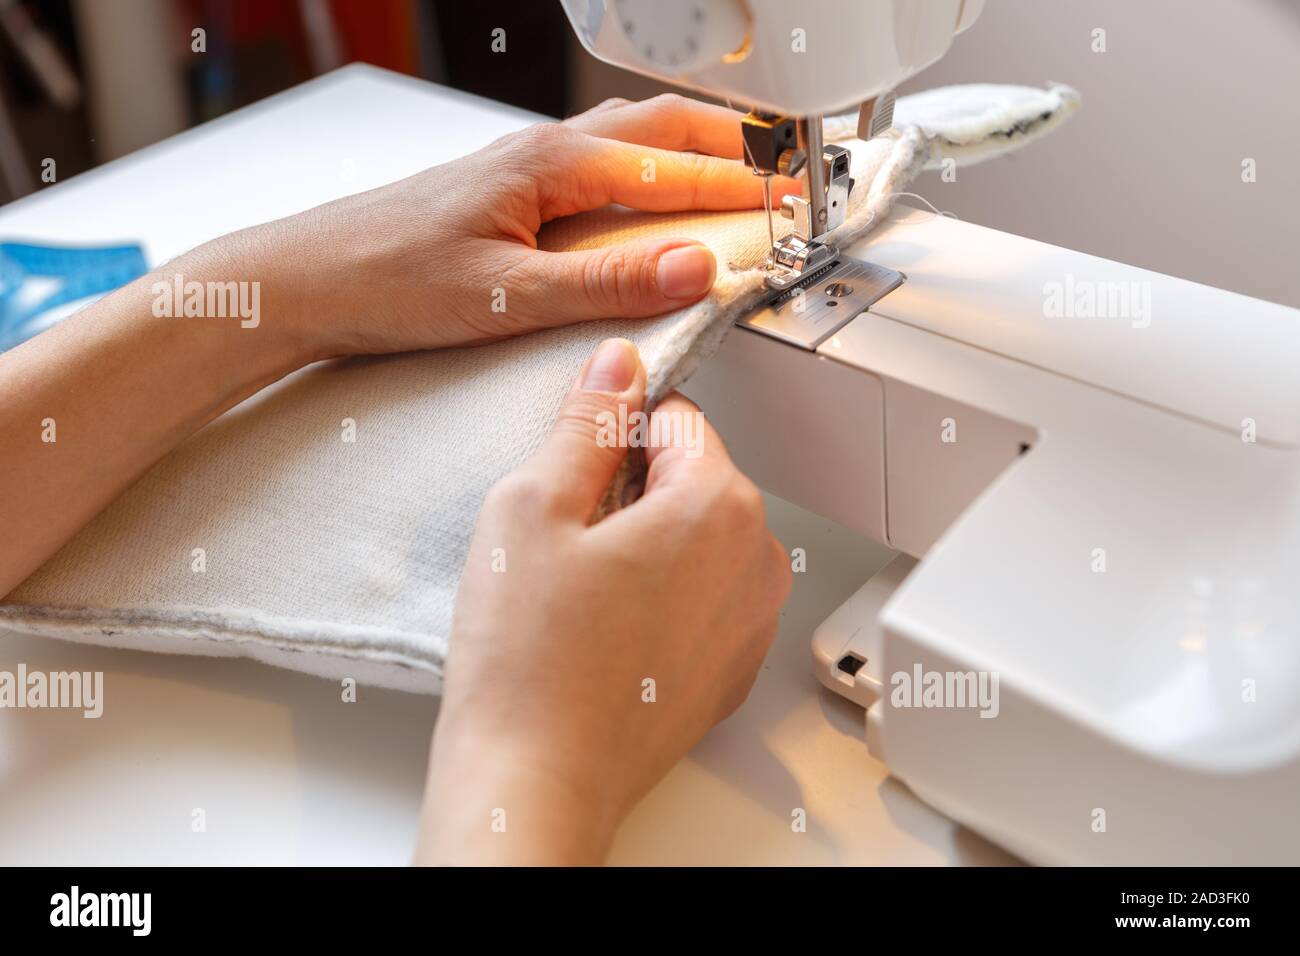 Sewing machine, standing on table Stock Photo